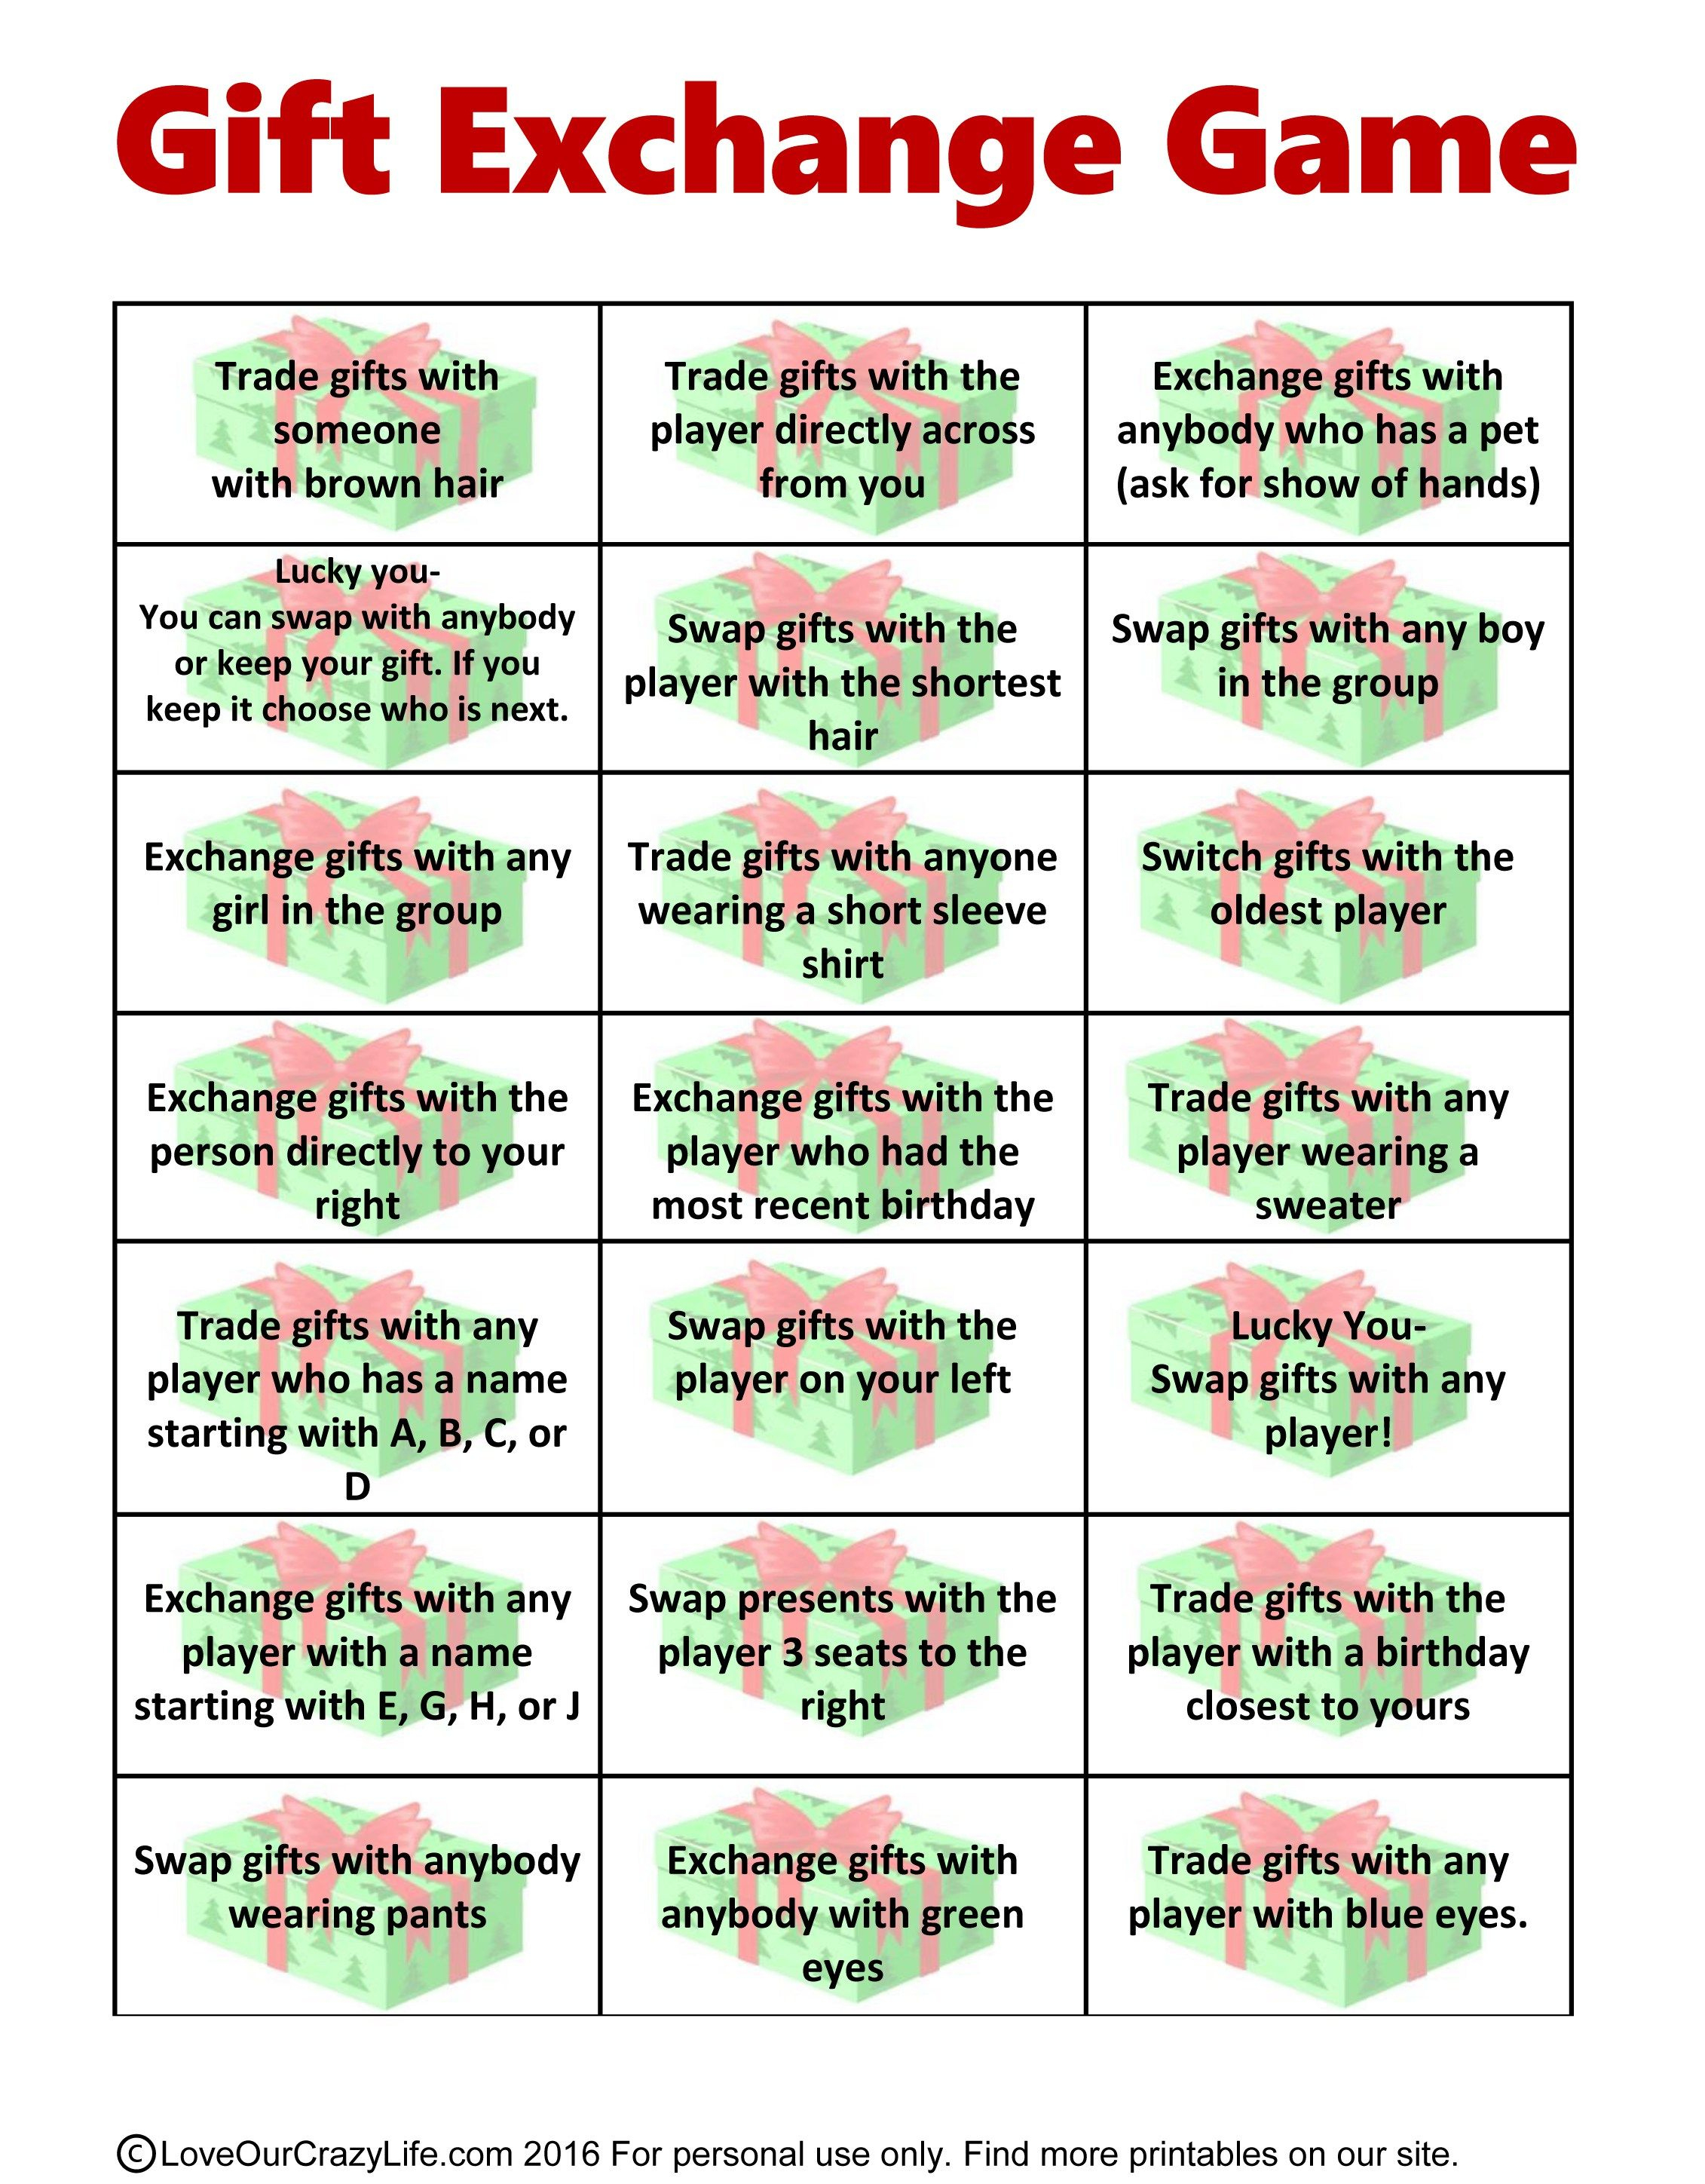 Free Gift Exchange Game Printable | Holiday Games | Pinterest - Holiday Office Party Games Free Printable